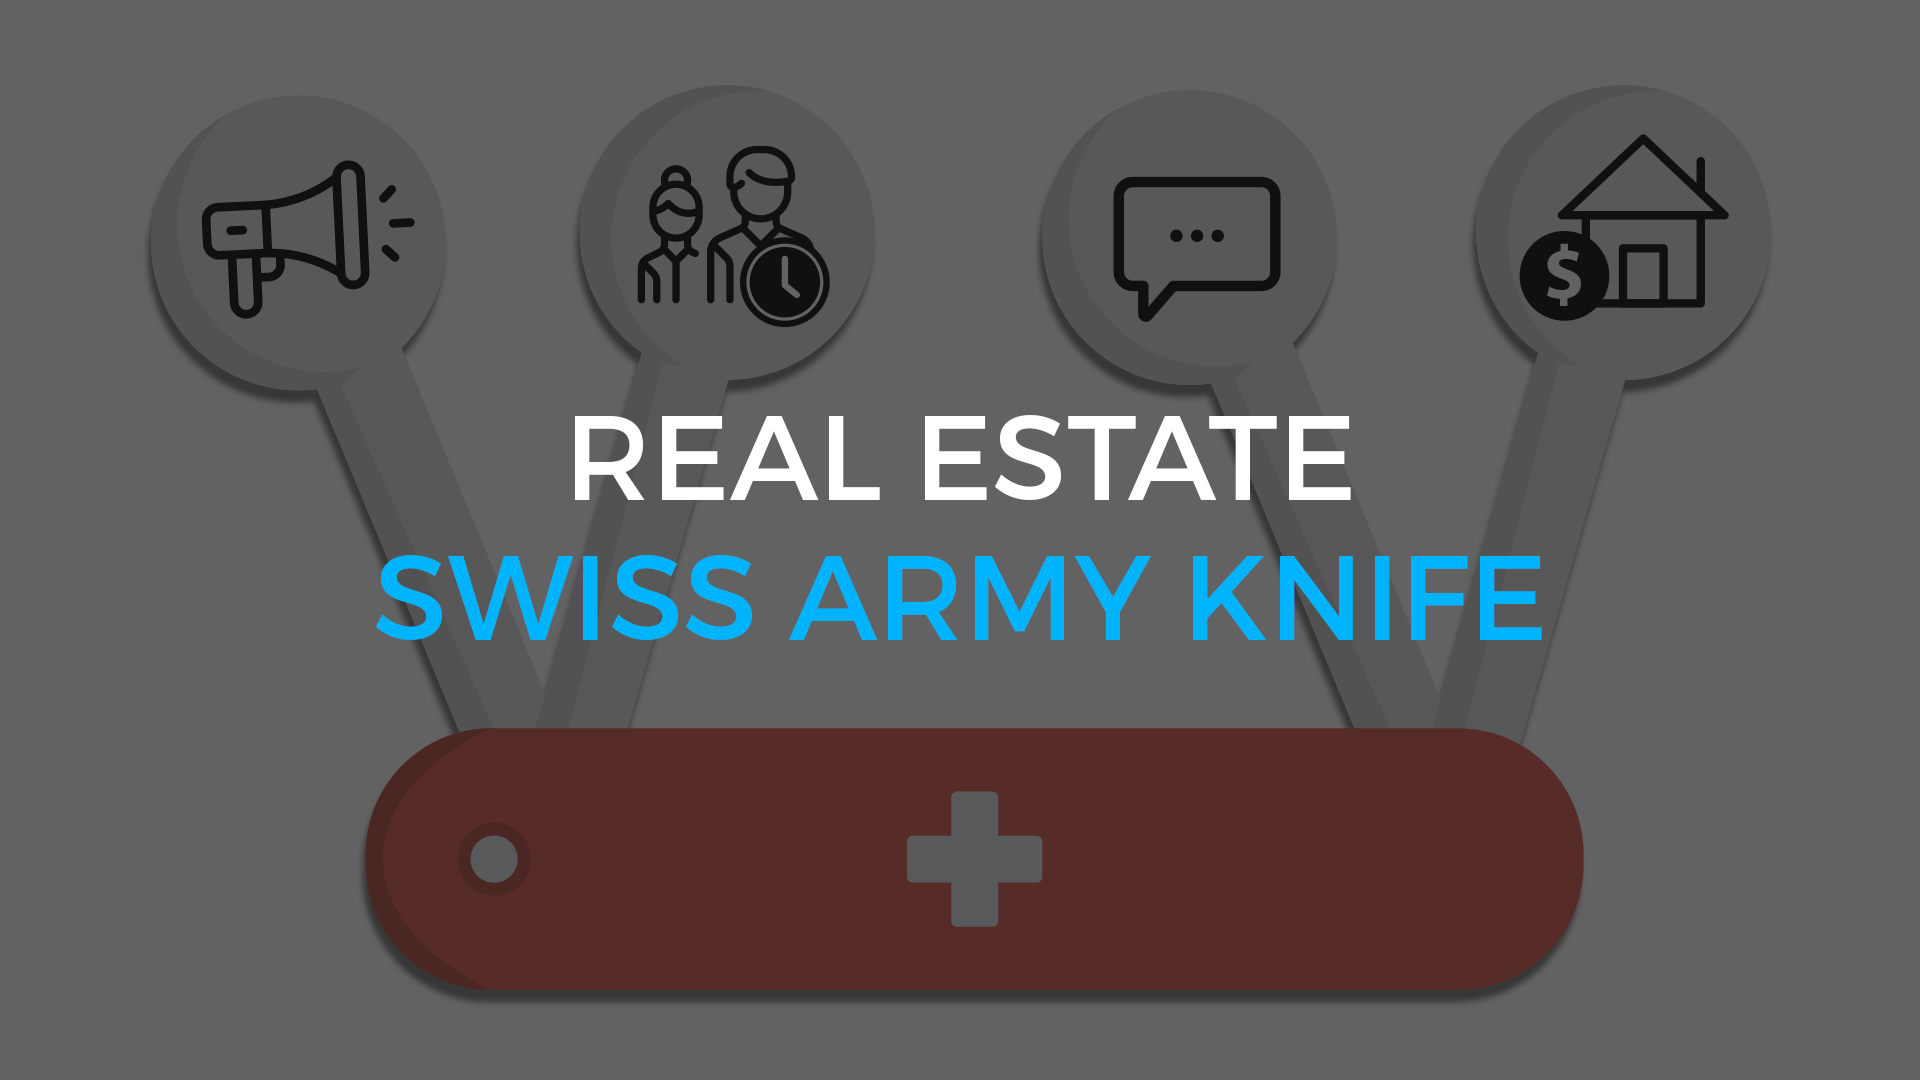 Digital Signage Swiss Army Knife for real estate